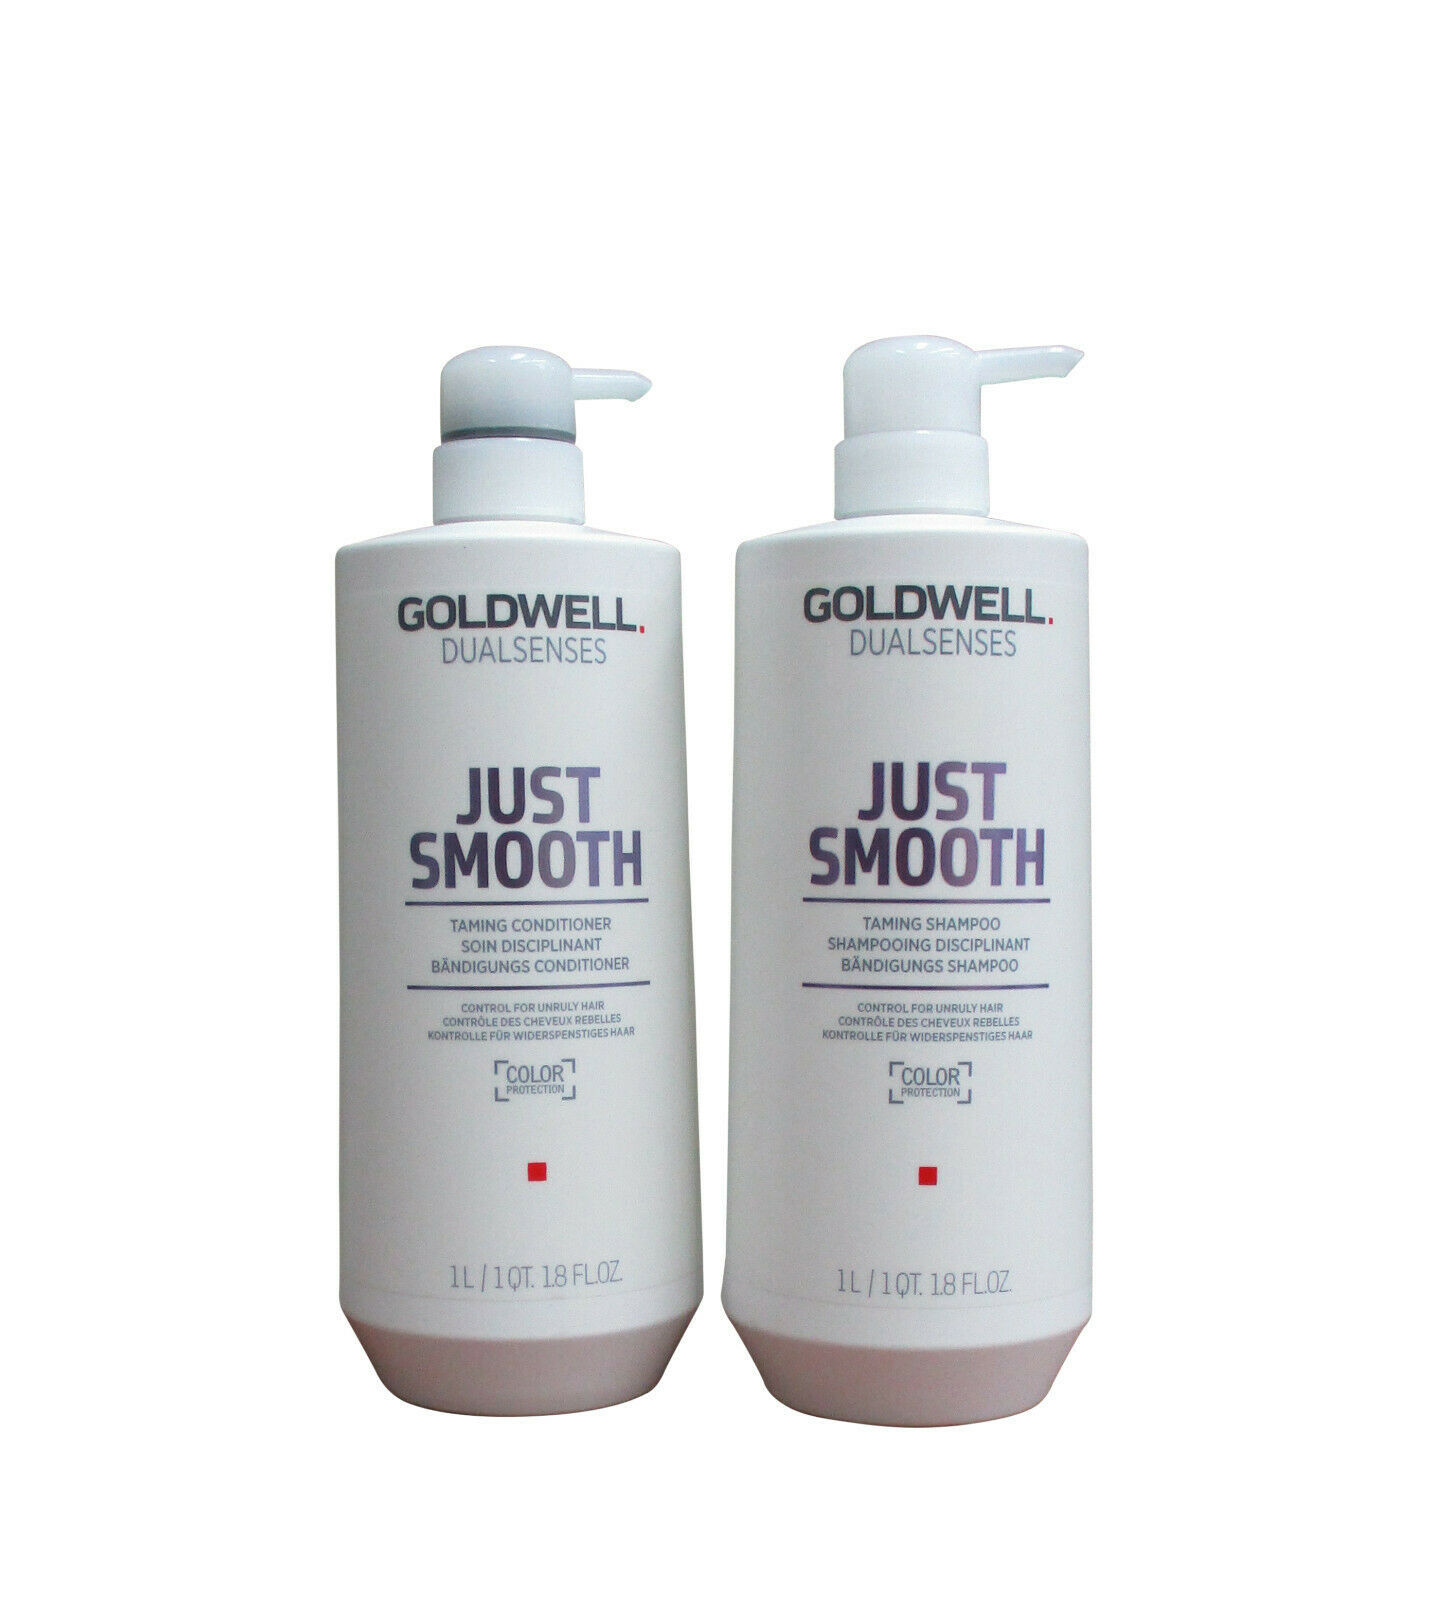 Goldwell Dualsenses Just Smooth Taming Shampoo and Conditioner Liter Duo 33.8 oz - $42.07